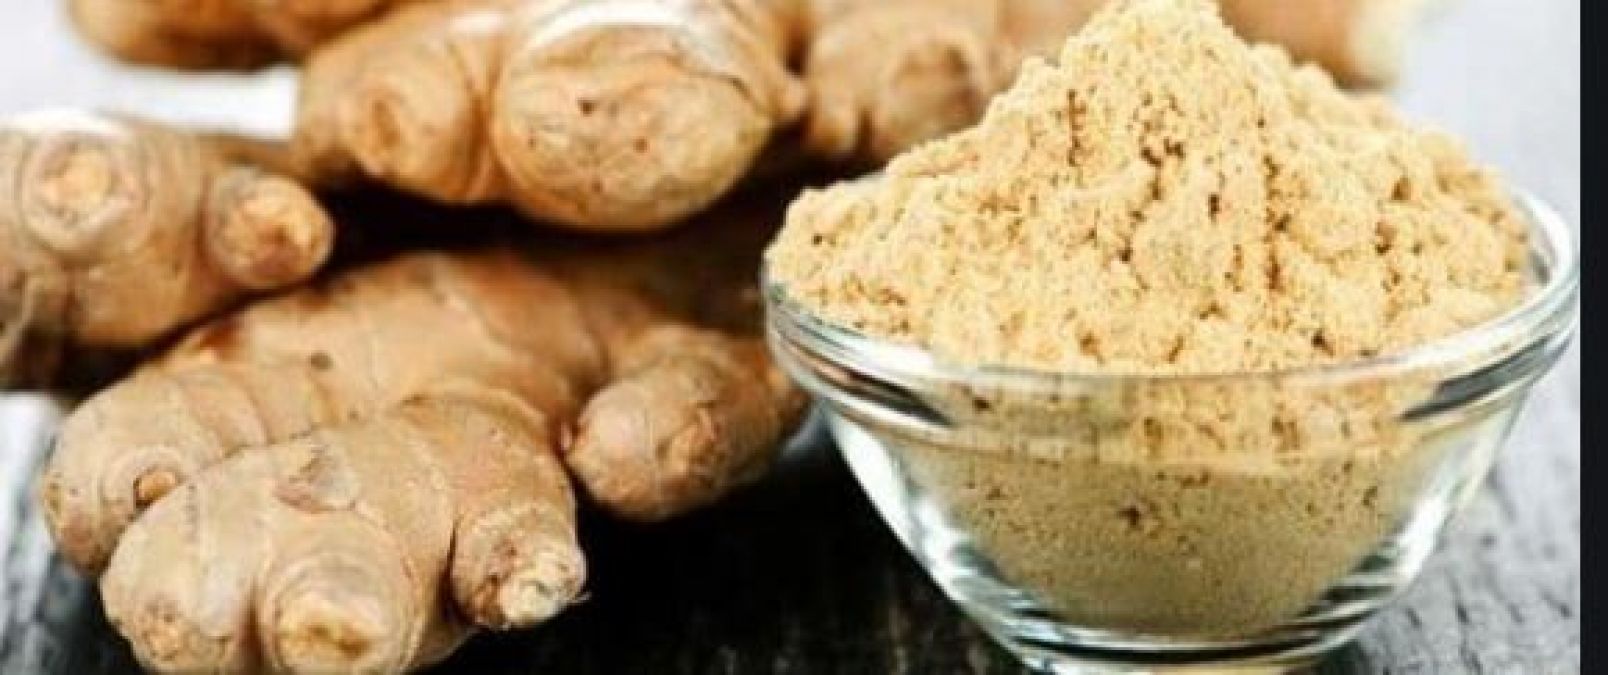 Troubled by constipation, then make ginger powder at home and use it like this